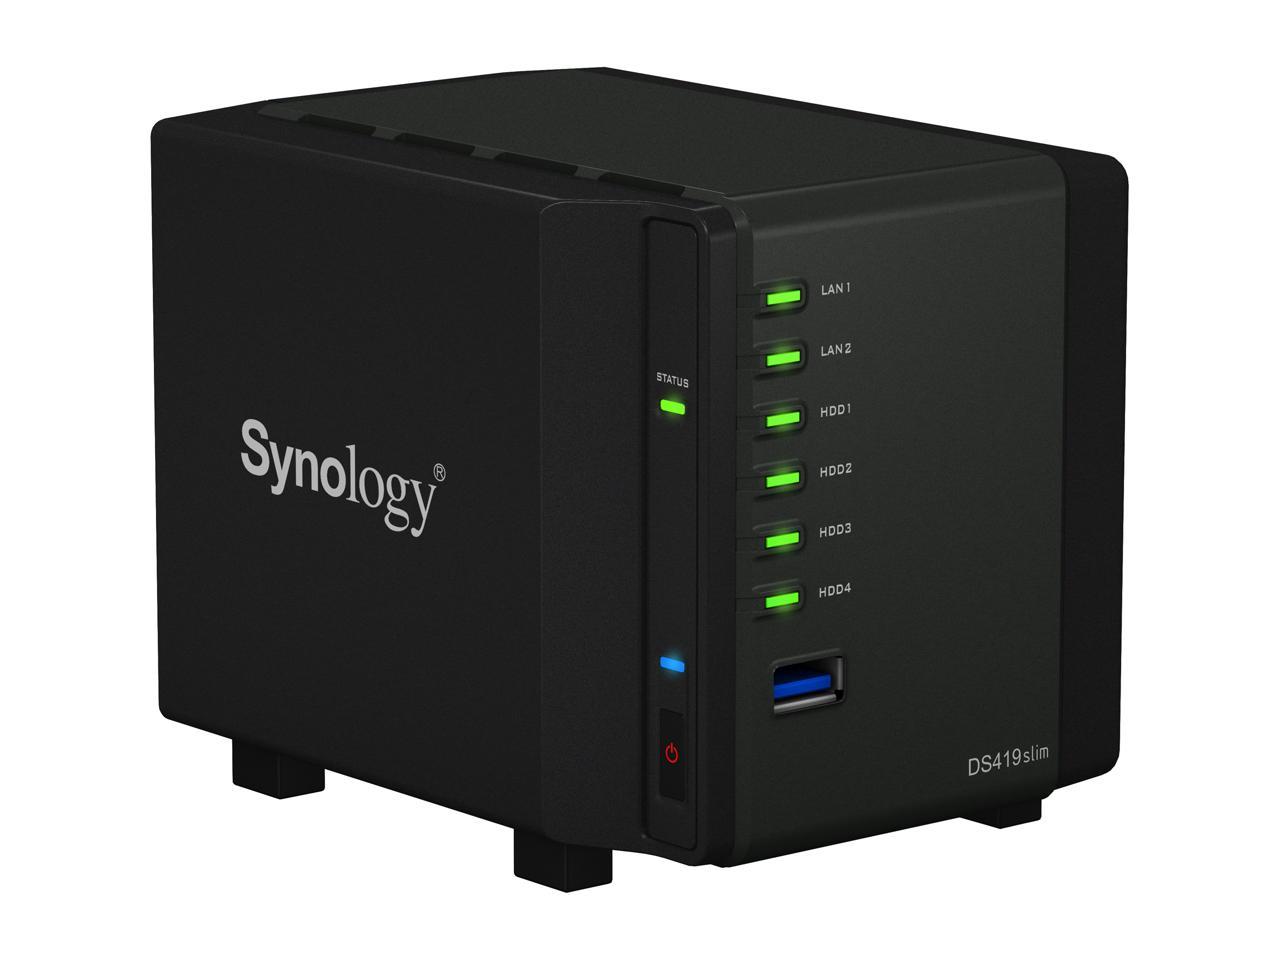 access synology drive remotely